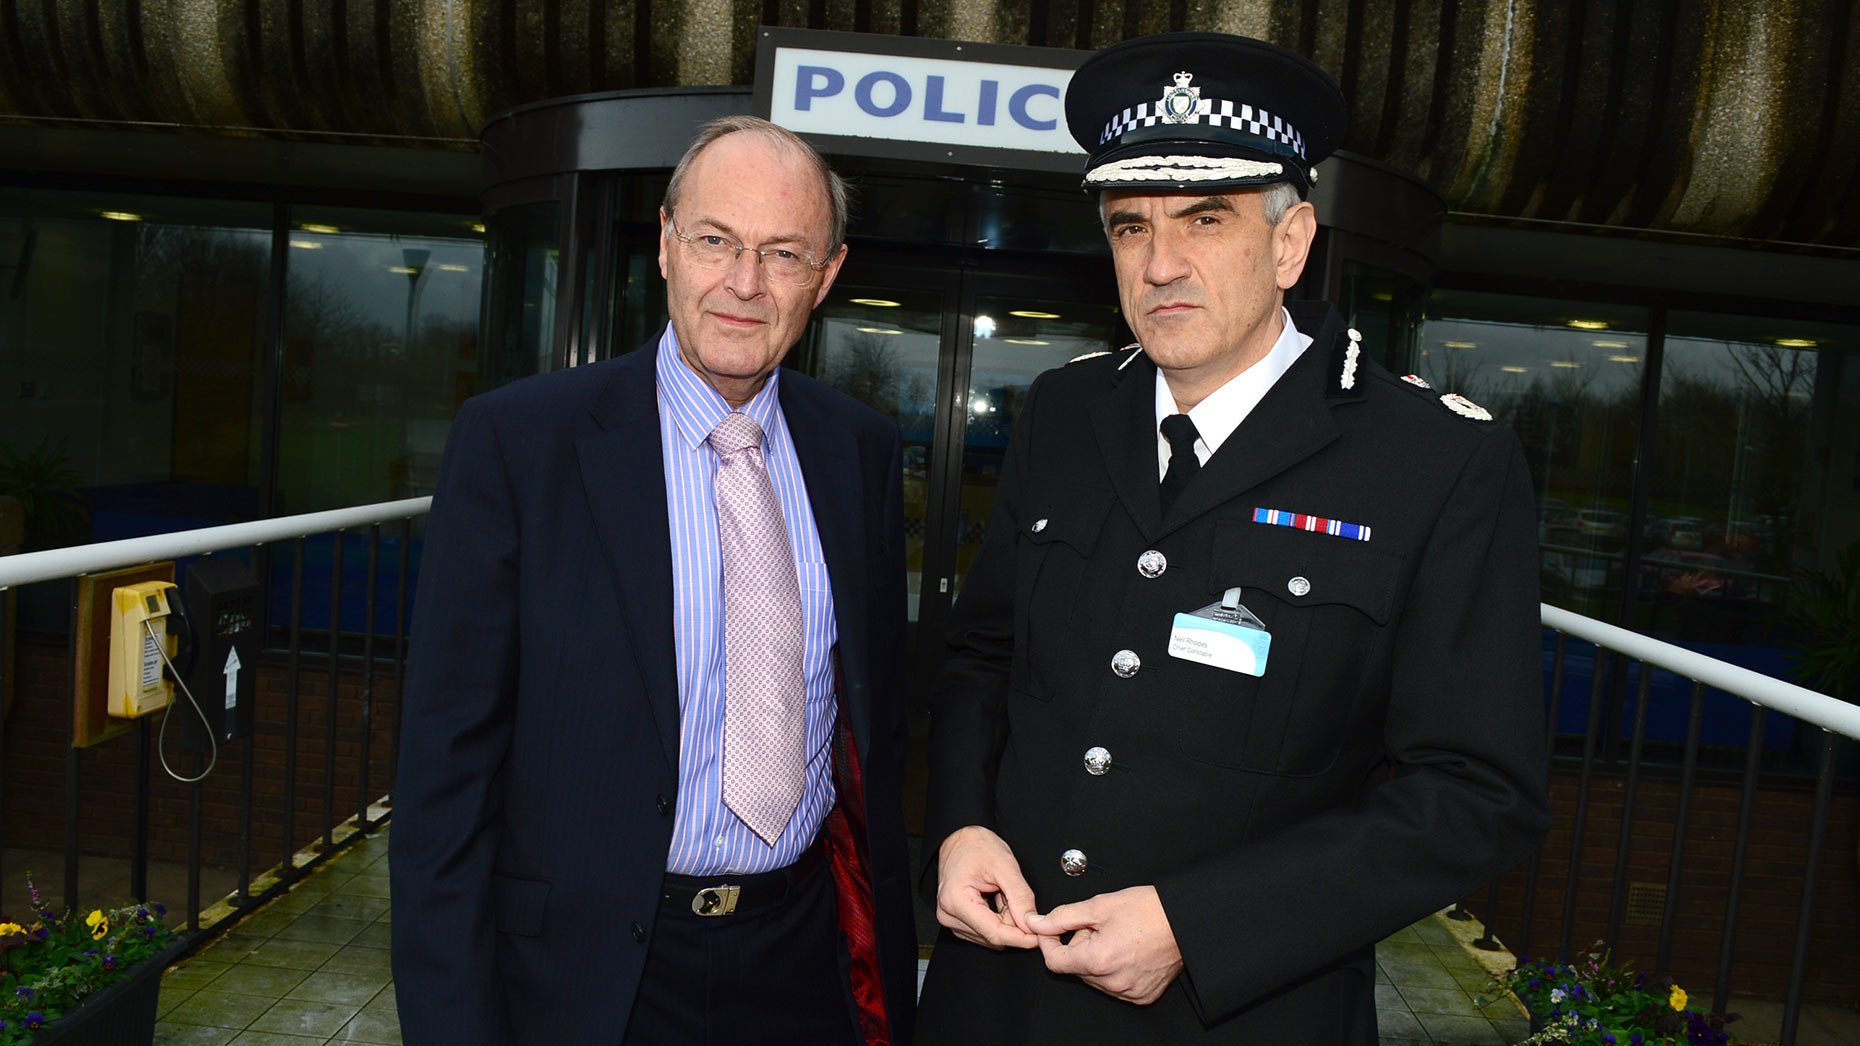 Lincolnshire PCC Alan Hardwick and Police Chief Constable Neil Rhodes in November 2012. Photo: Steve Smailes for The Lincolnite